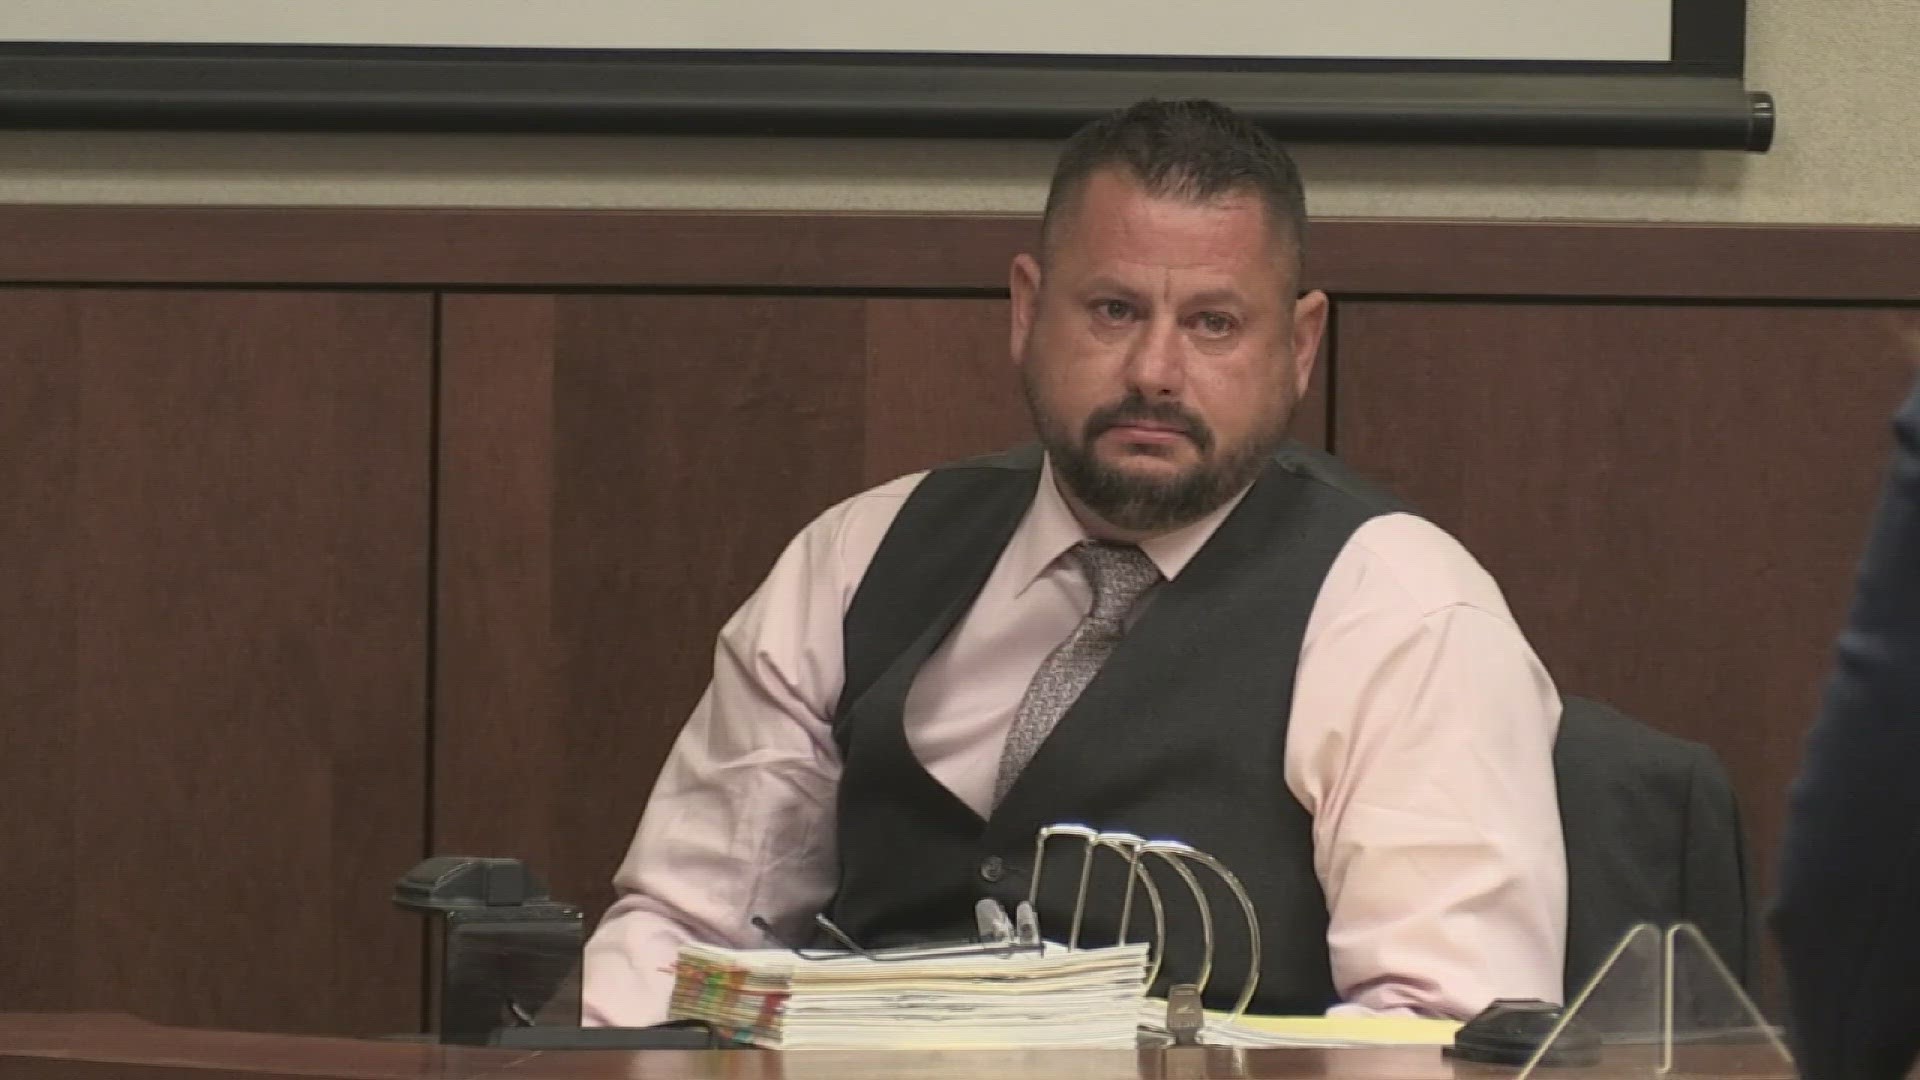 Detective Aaron Tinelli fought back emotions during Friday's testimony in one of Louisville's most heinous murder trials.